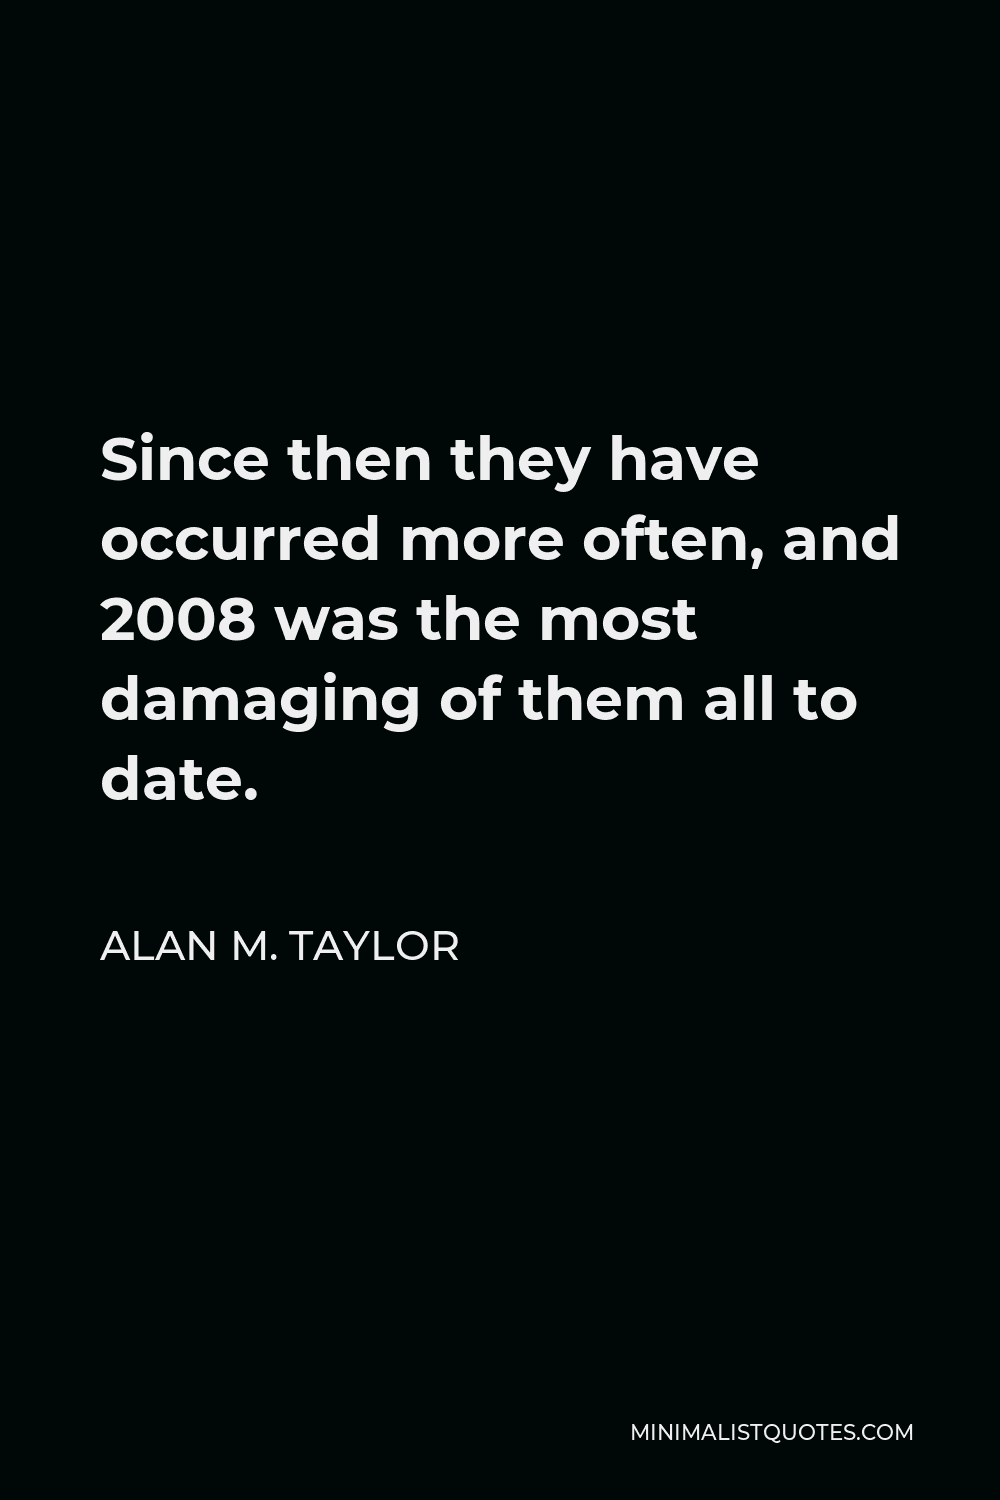 Alan M. Taylor Quote - Since then they have occurred more often, and 2008 was the most damaging of them all to date.